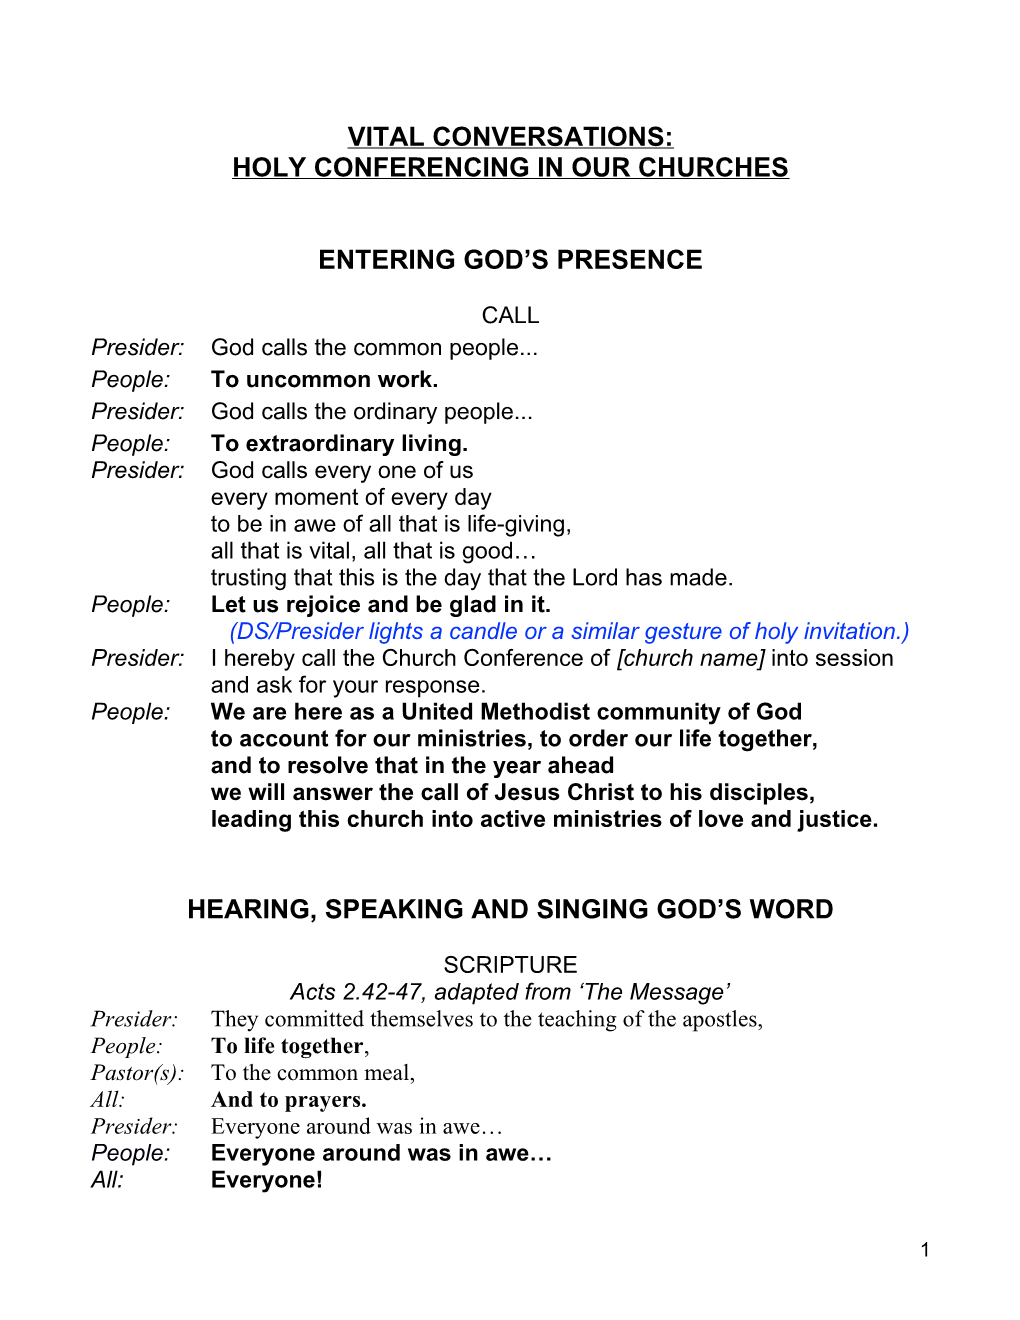 Holy Conferencing in Our Churches